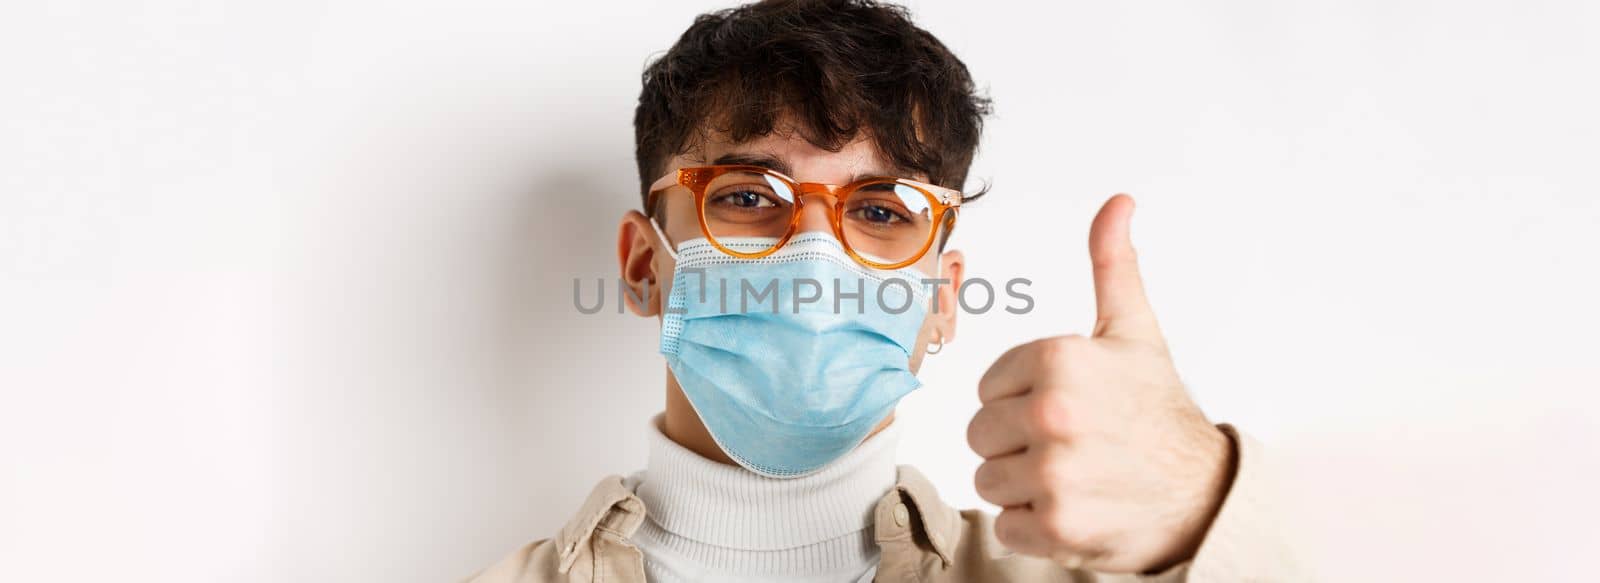 Portrait of young man in glasses and medical mask showing thumb up, smiling with eyes, standing on white background. Covid-19 and pandemic concept.